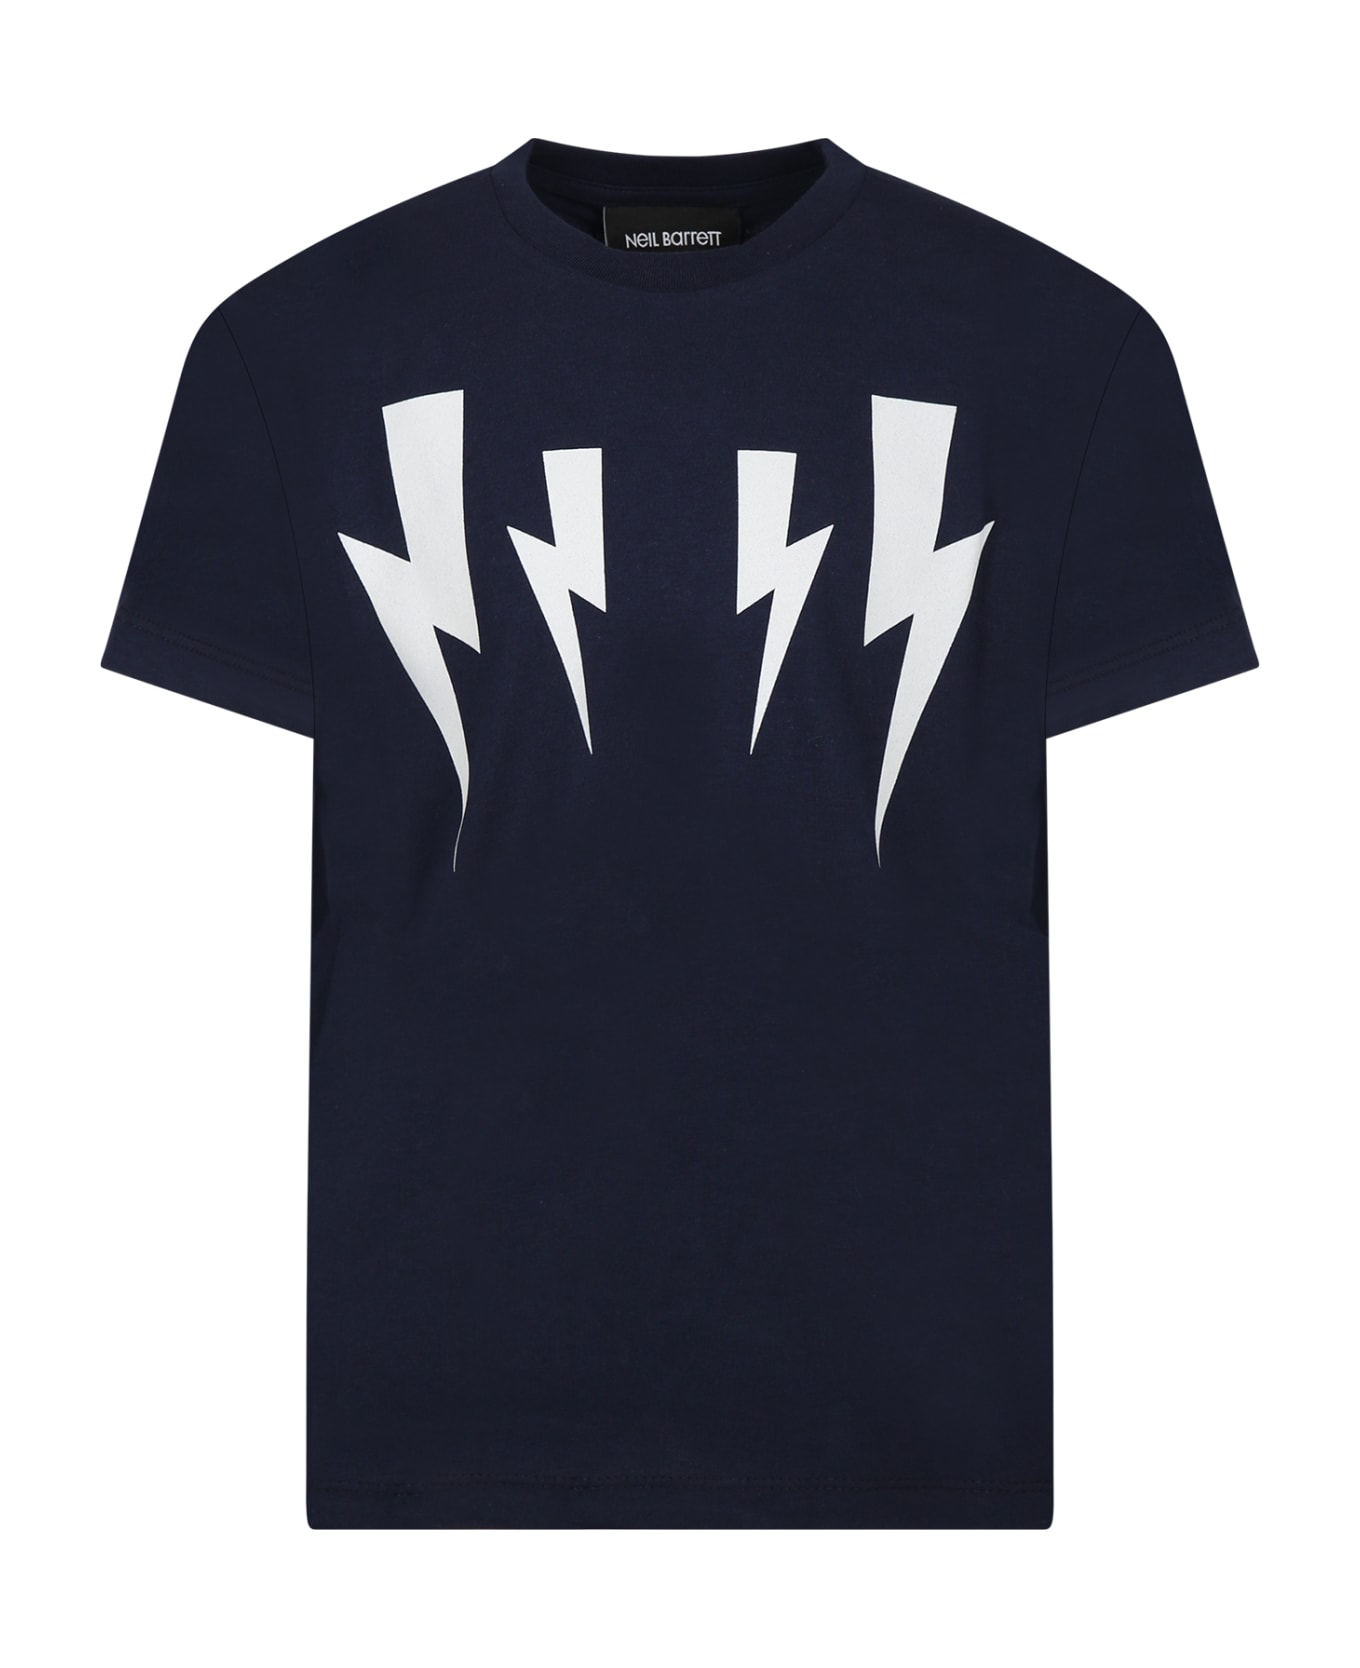 Neil Barrett Blue T-shirt For Boy With Iconic Lightning Bolts - Blue Tシャツ＆ポロシャツ